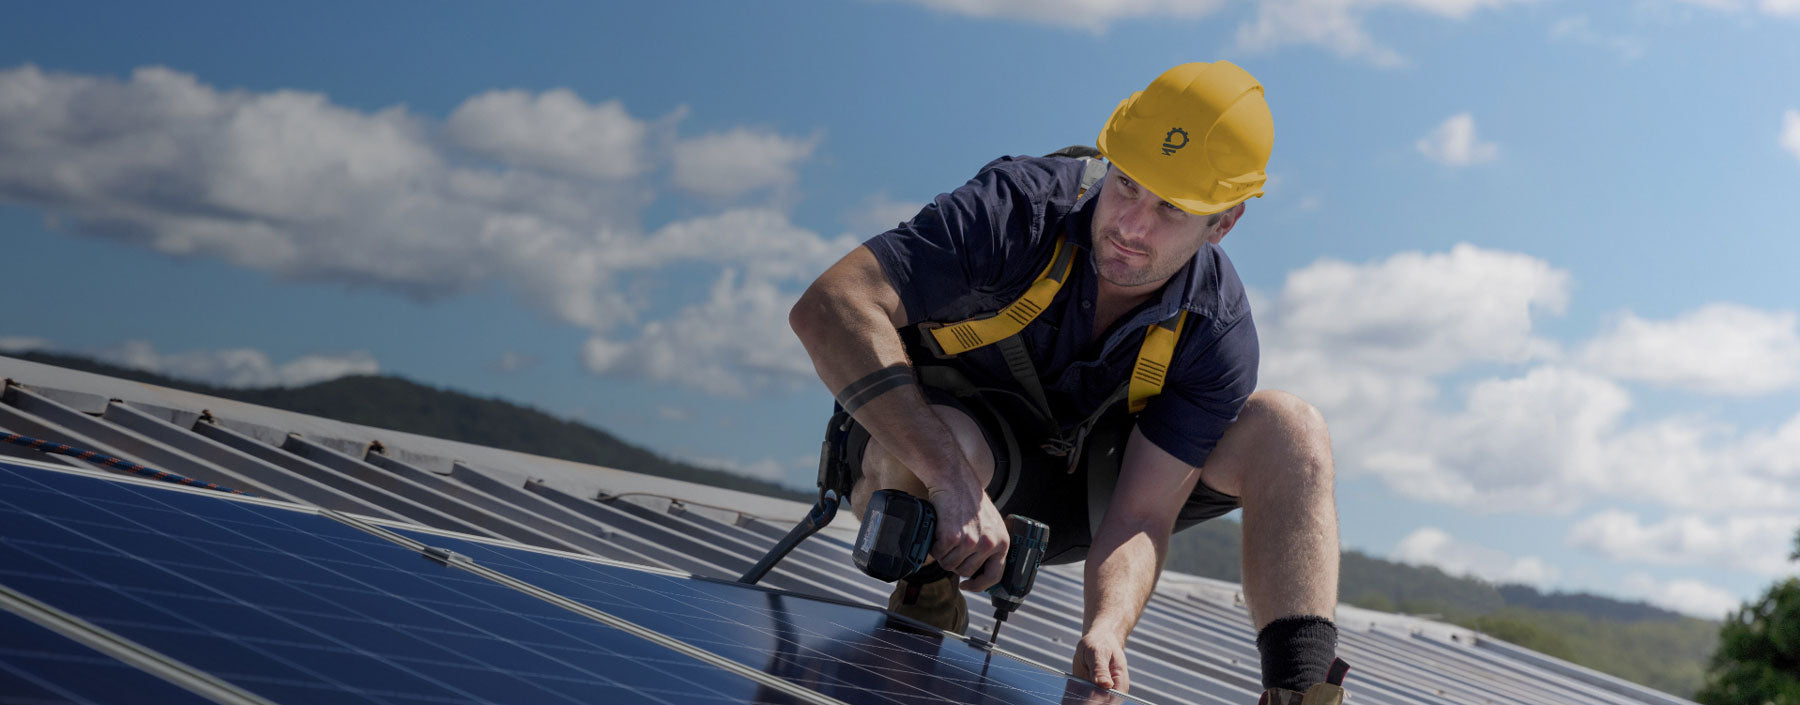 A HPS solar expert installing a solar & backup power system on a roof of a commercial building.